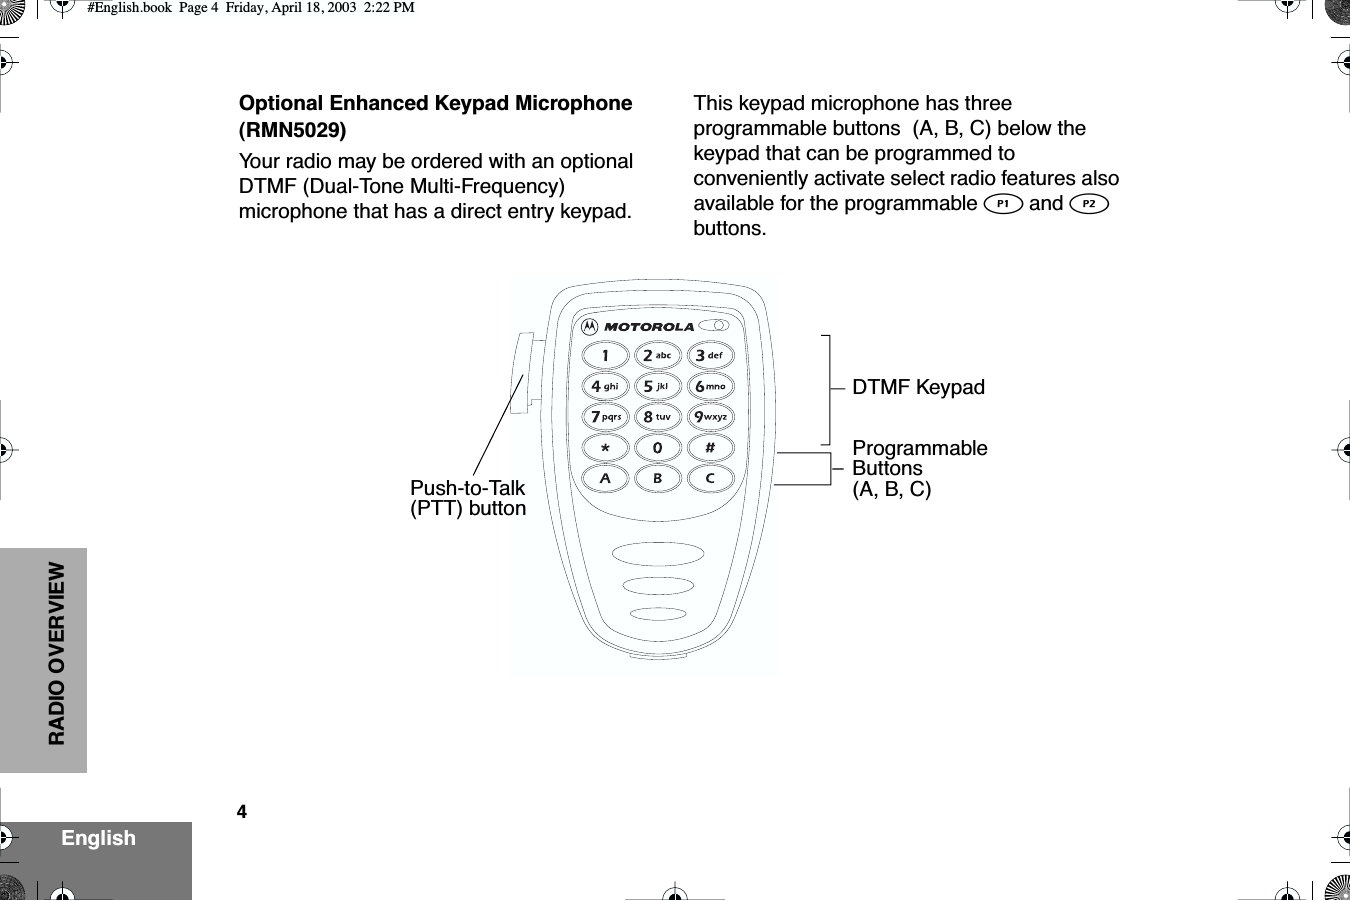  4 EnglishRADIO OVERVIEWOptional Enhanced Keypad Microphone (RMN5029) Your radio may be ordered with an optional DTMF (Dual-Tone Multi-Frequency) microphone that has a direct entry keypad.This keypad microphone has three programmable buttons  (A, B, C) below the keypad that can be programmed to conveniently activate select radio features also available for the programmable  g  and  h  buttons.DTMF KeypadPush-to-Talk(PTT) buttonProgrammableButtons(A, B, C) #English.book  Page 4  Friday, April 18, 2003  2:22 PM